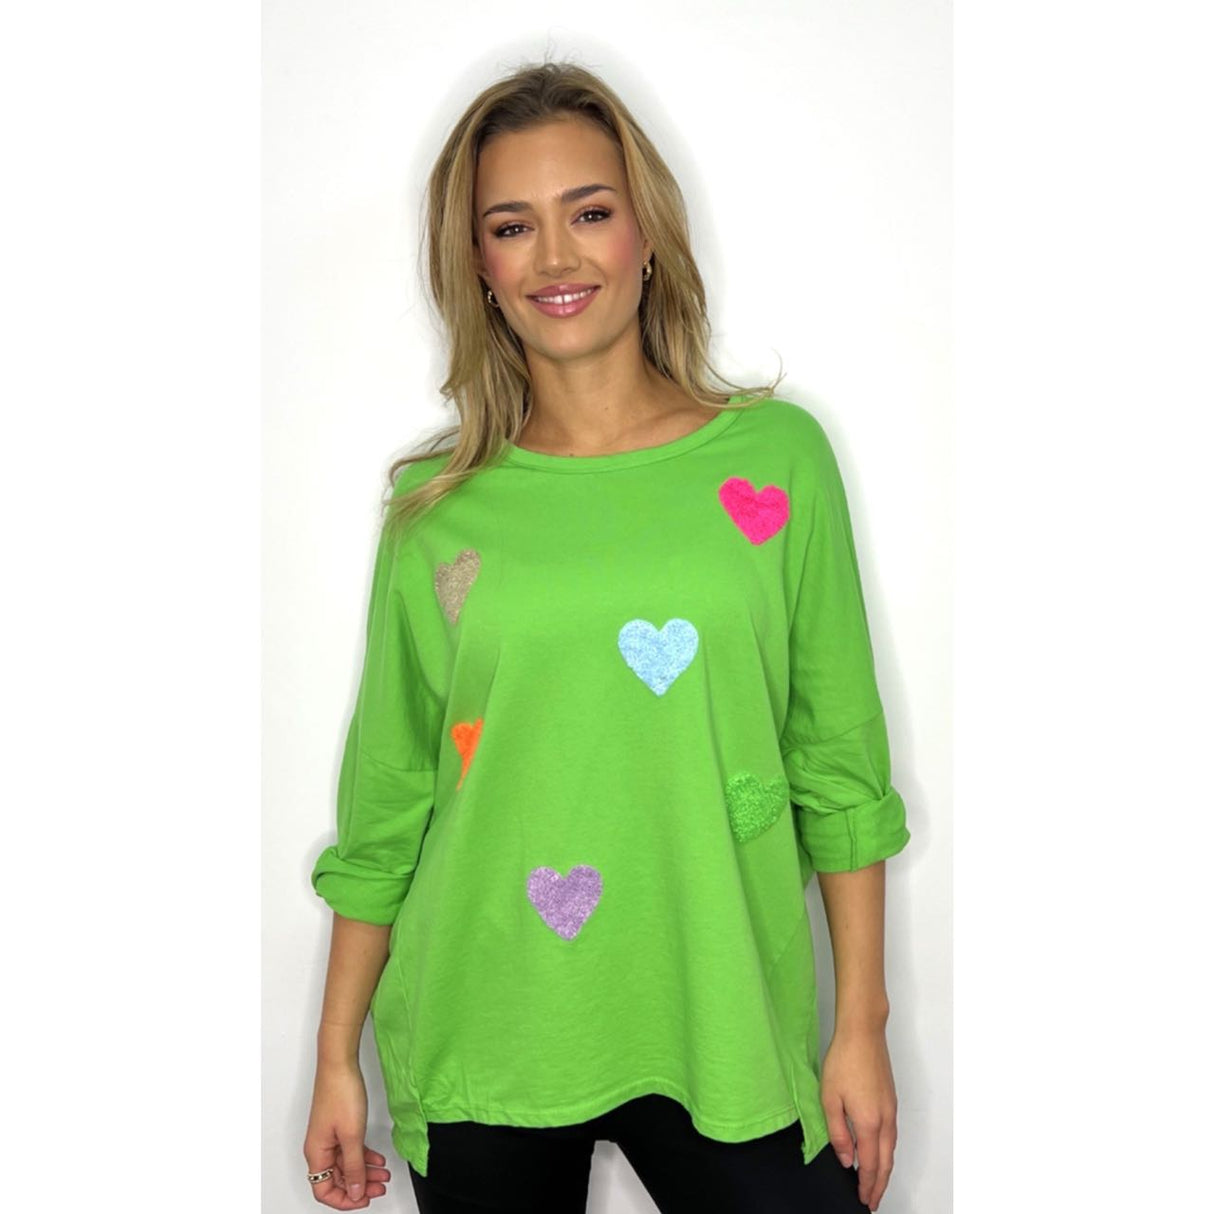 SWEETHEARTS EMBROIDERIED RELAXING FIT SWEATSHIRT ONESIZE FITS ALL 8-16